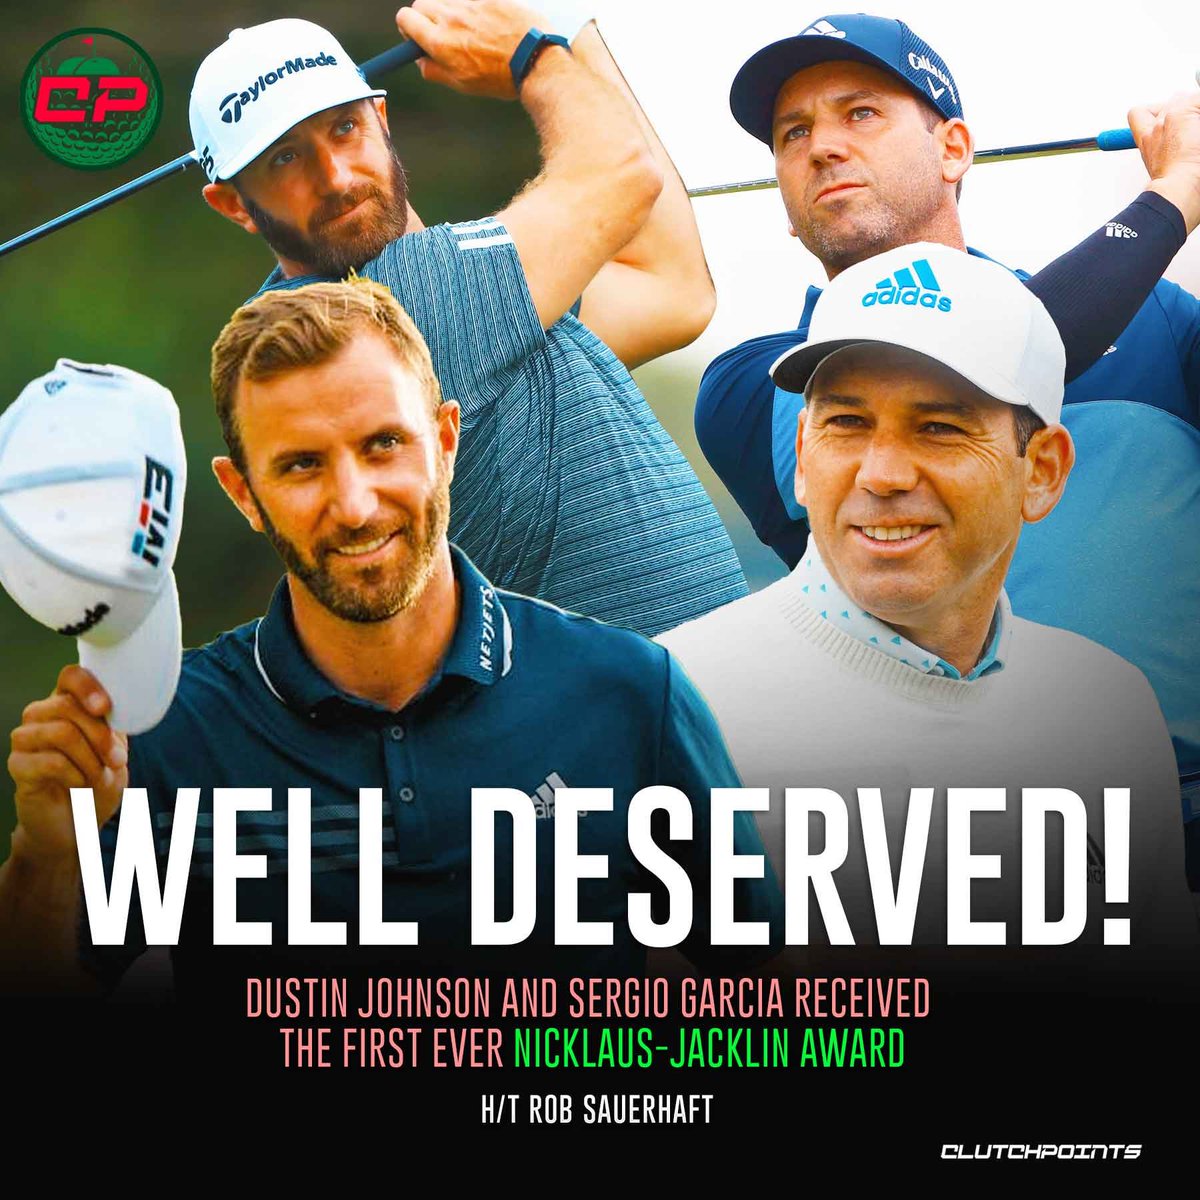 Aon and Ryder Cup Europe established the said award to commemorate the PGA of America.

Congrats to the first-ever winners, Dustin Johnson and Sergio Garcia! https://t.co/U2KoF34bQB